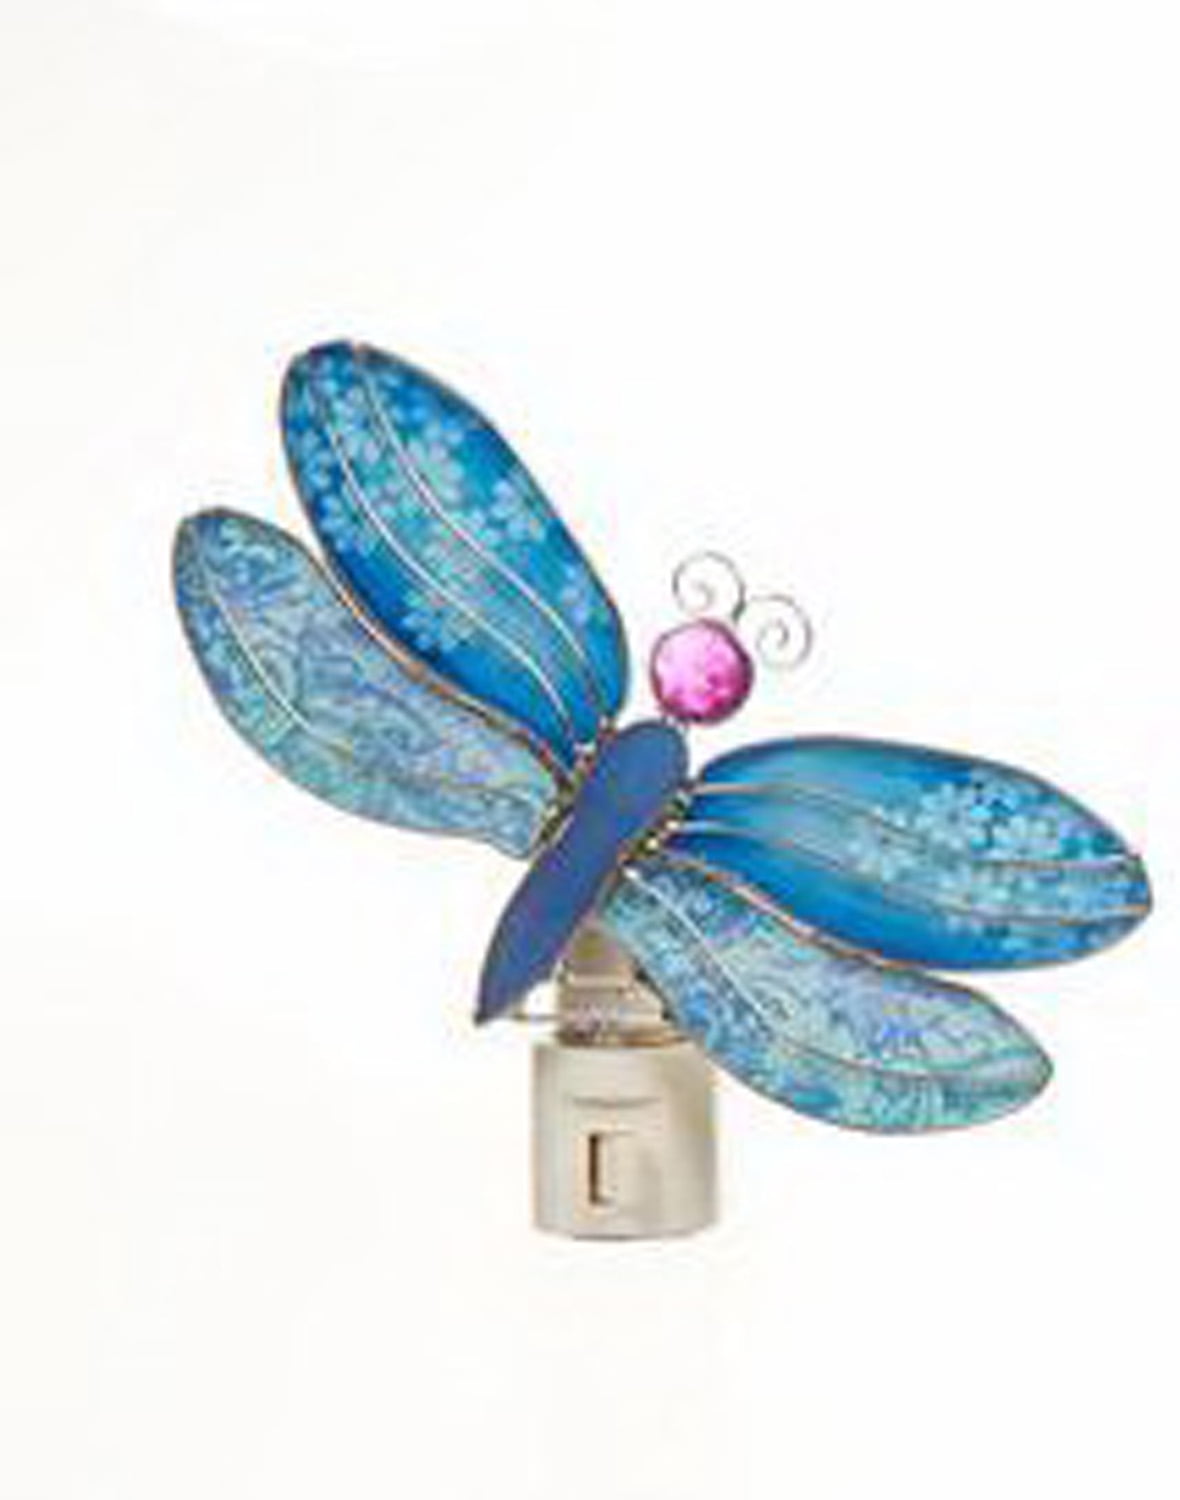 Rotating Light Sensor Swivel Dragonfly Night Light Bedroom Bathroom Kitchen Decor Wall Plug in Stained Glass Insect Bug Gift For Friend